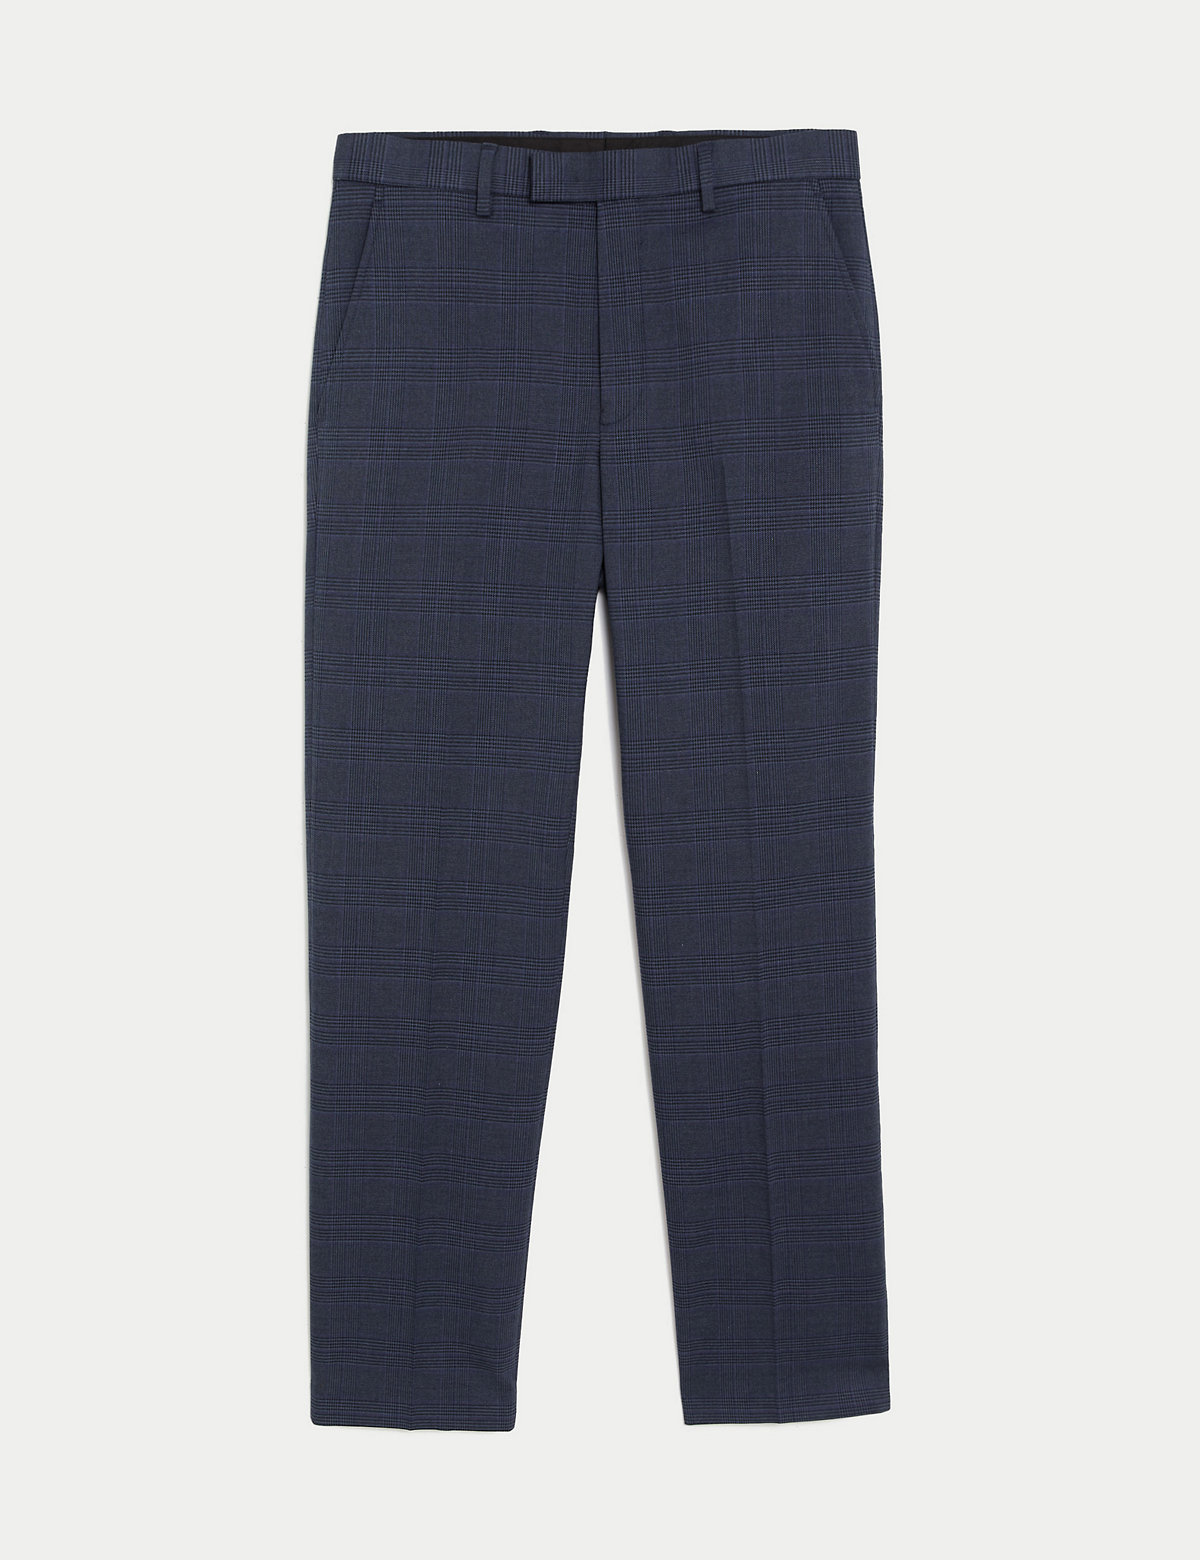 Regular Fit Check Stretch Suit Trousers